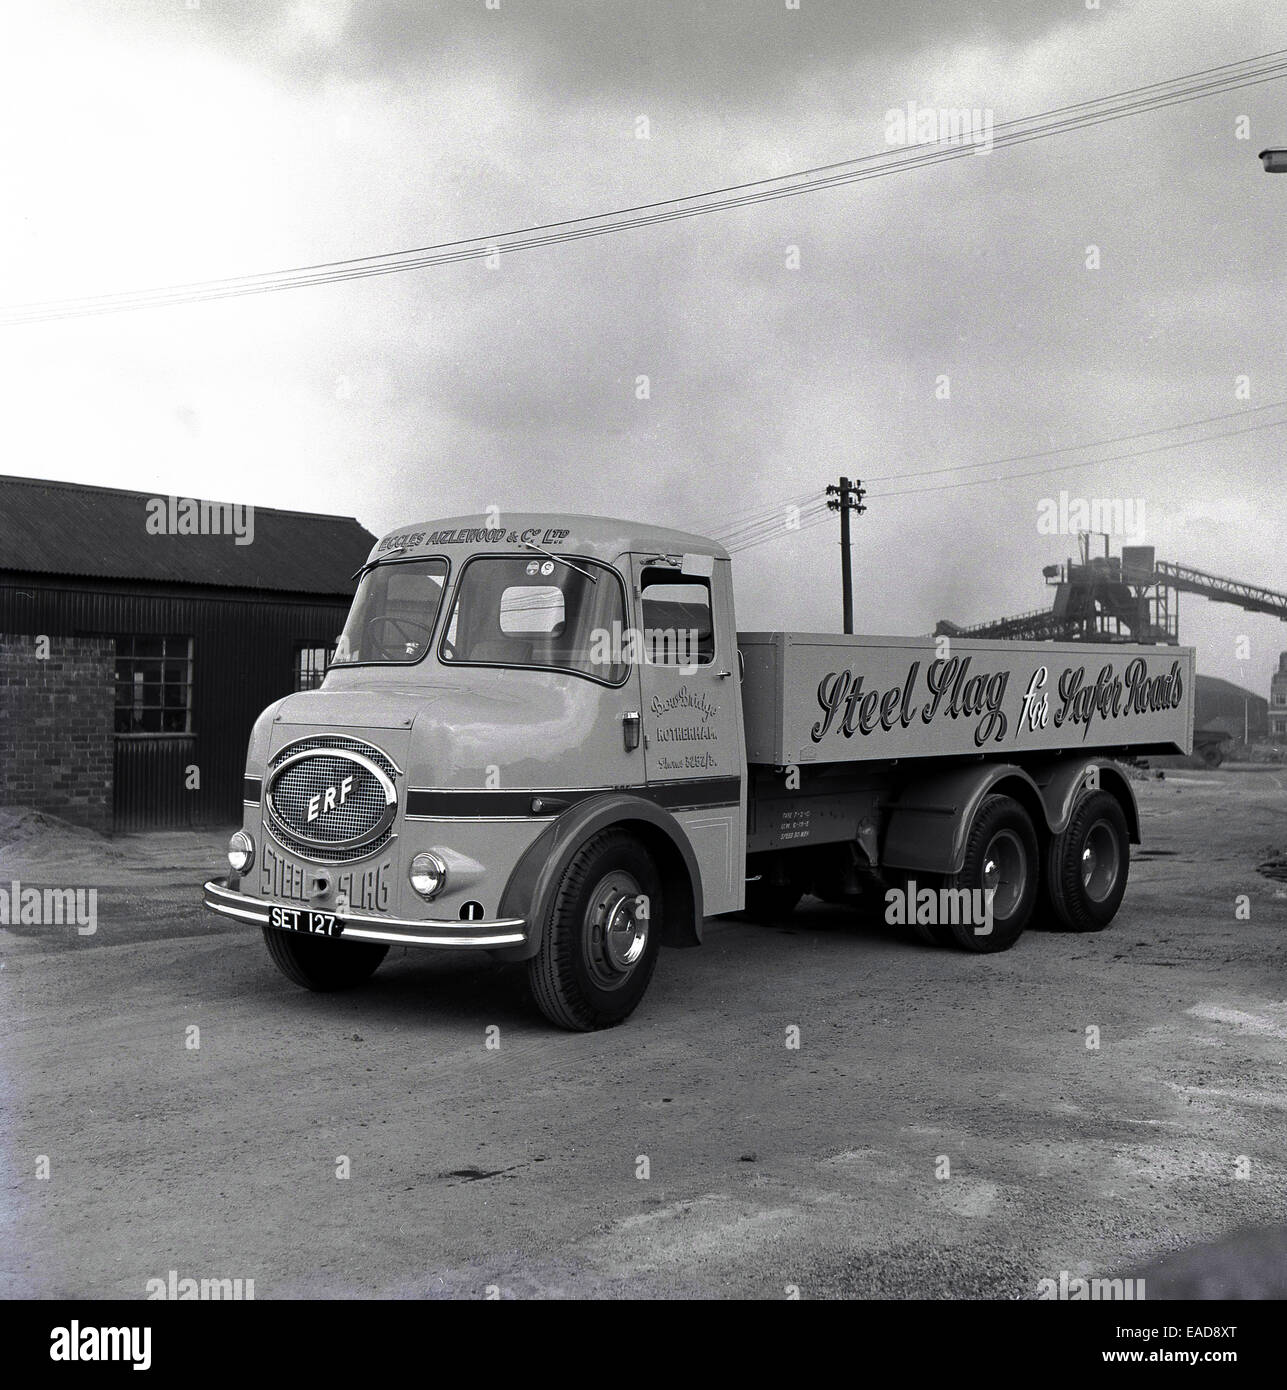 ERF (camion) azienda Historical-picture-1950s-a-steel-slag-truck-parked-at-a-yard-or-depot-EAD8XT